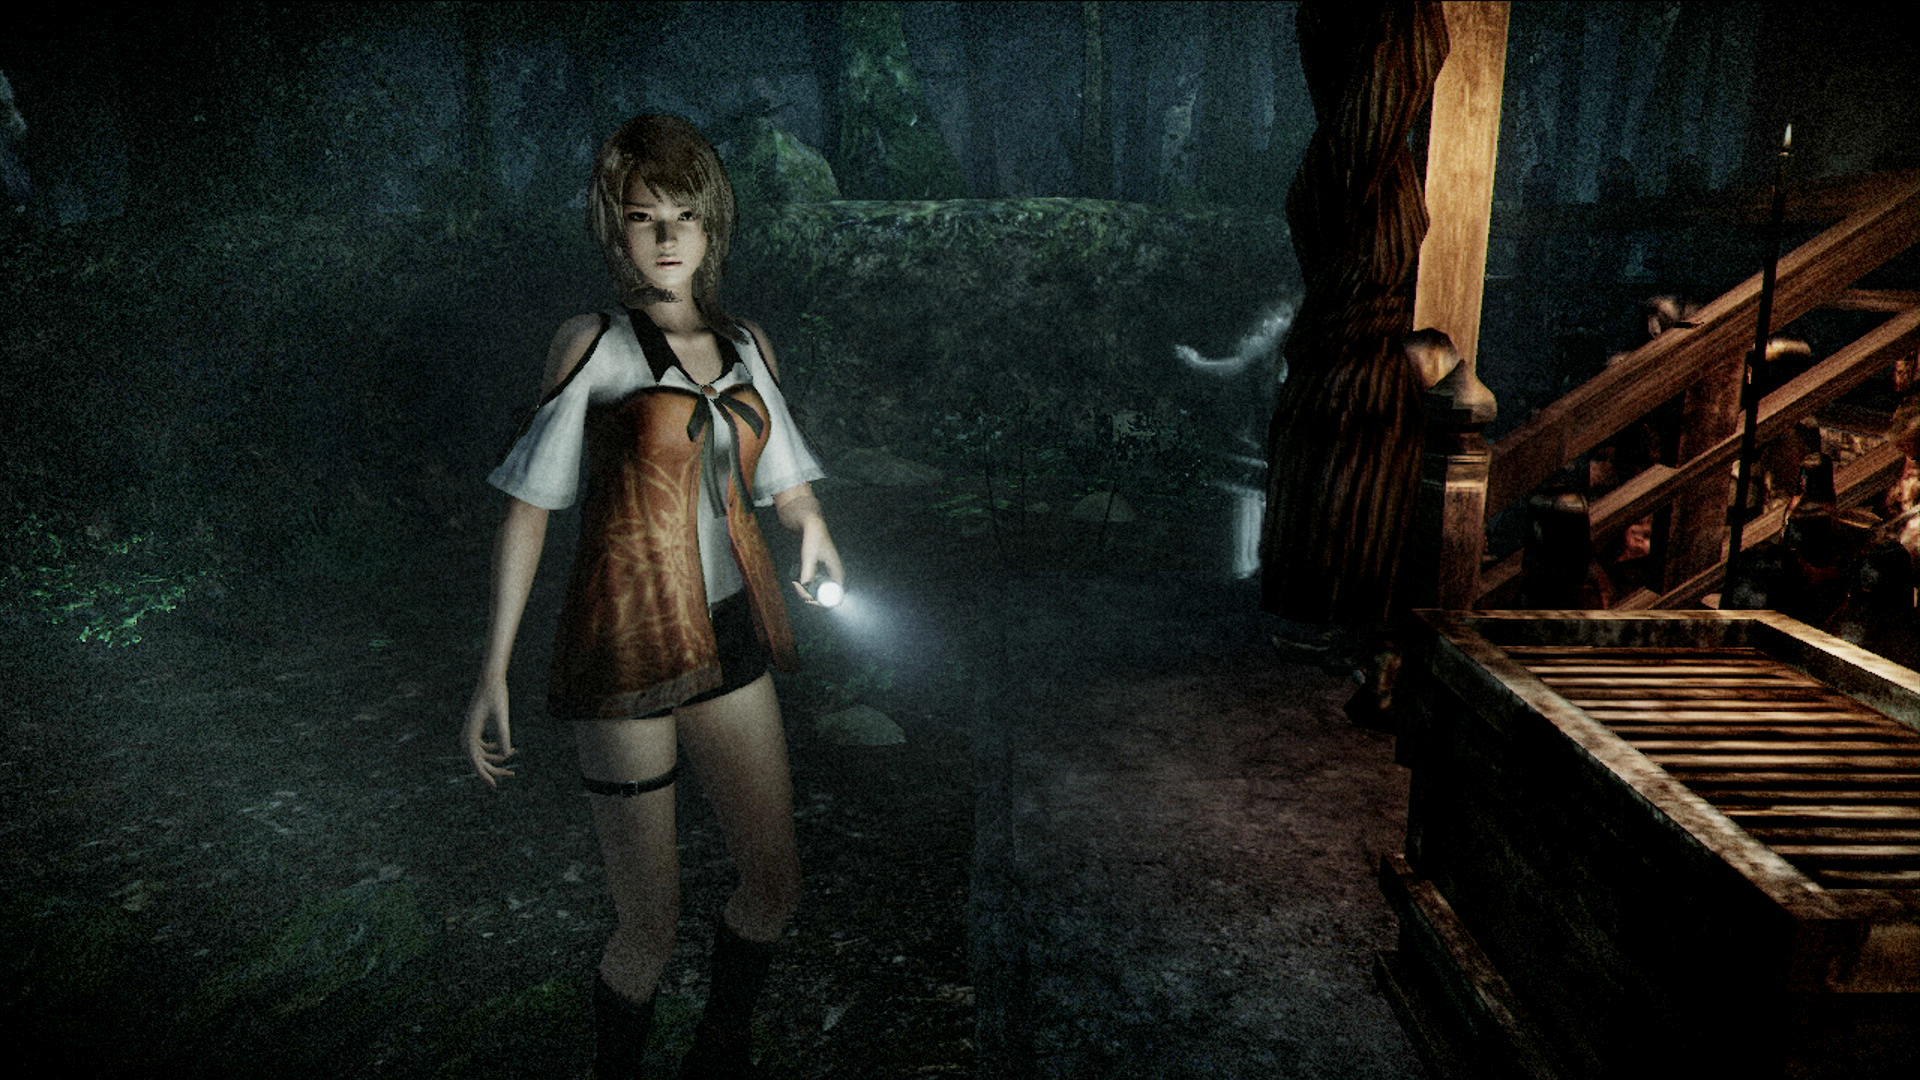 Why the hell did Nintendo not mention the fact that Fatal Frame is coming out this year?  That's a key exclusive.